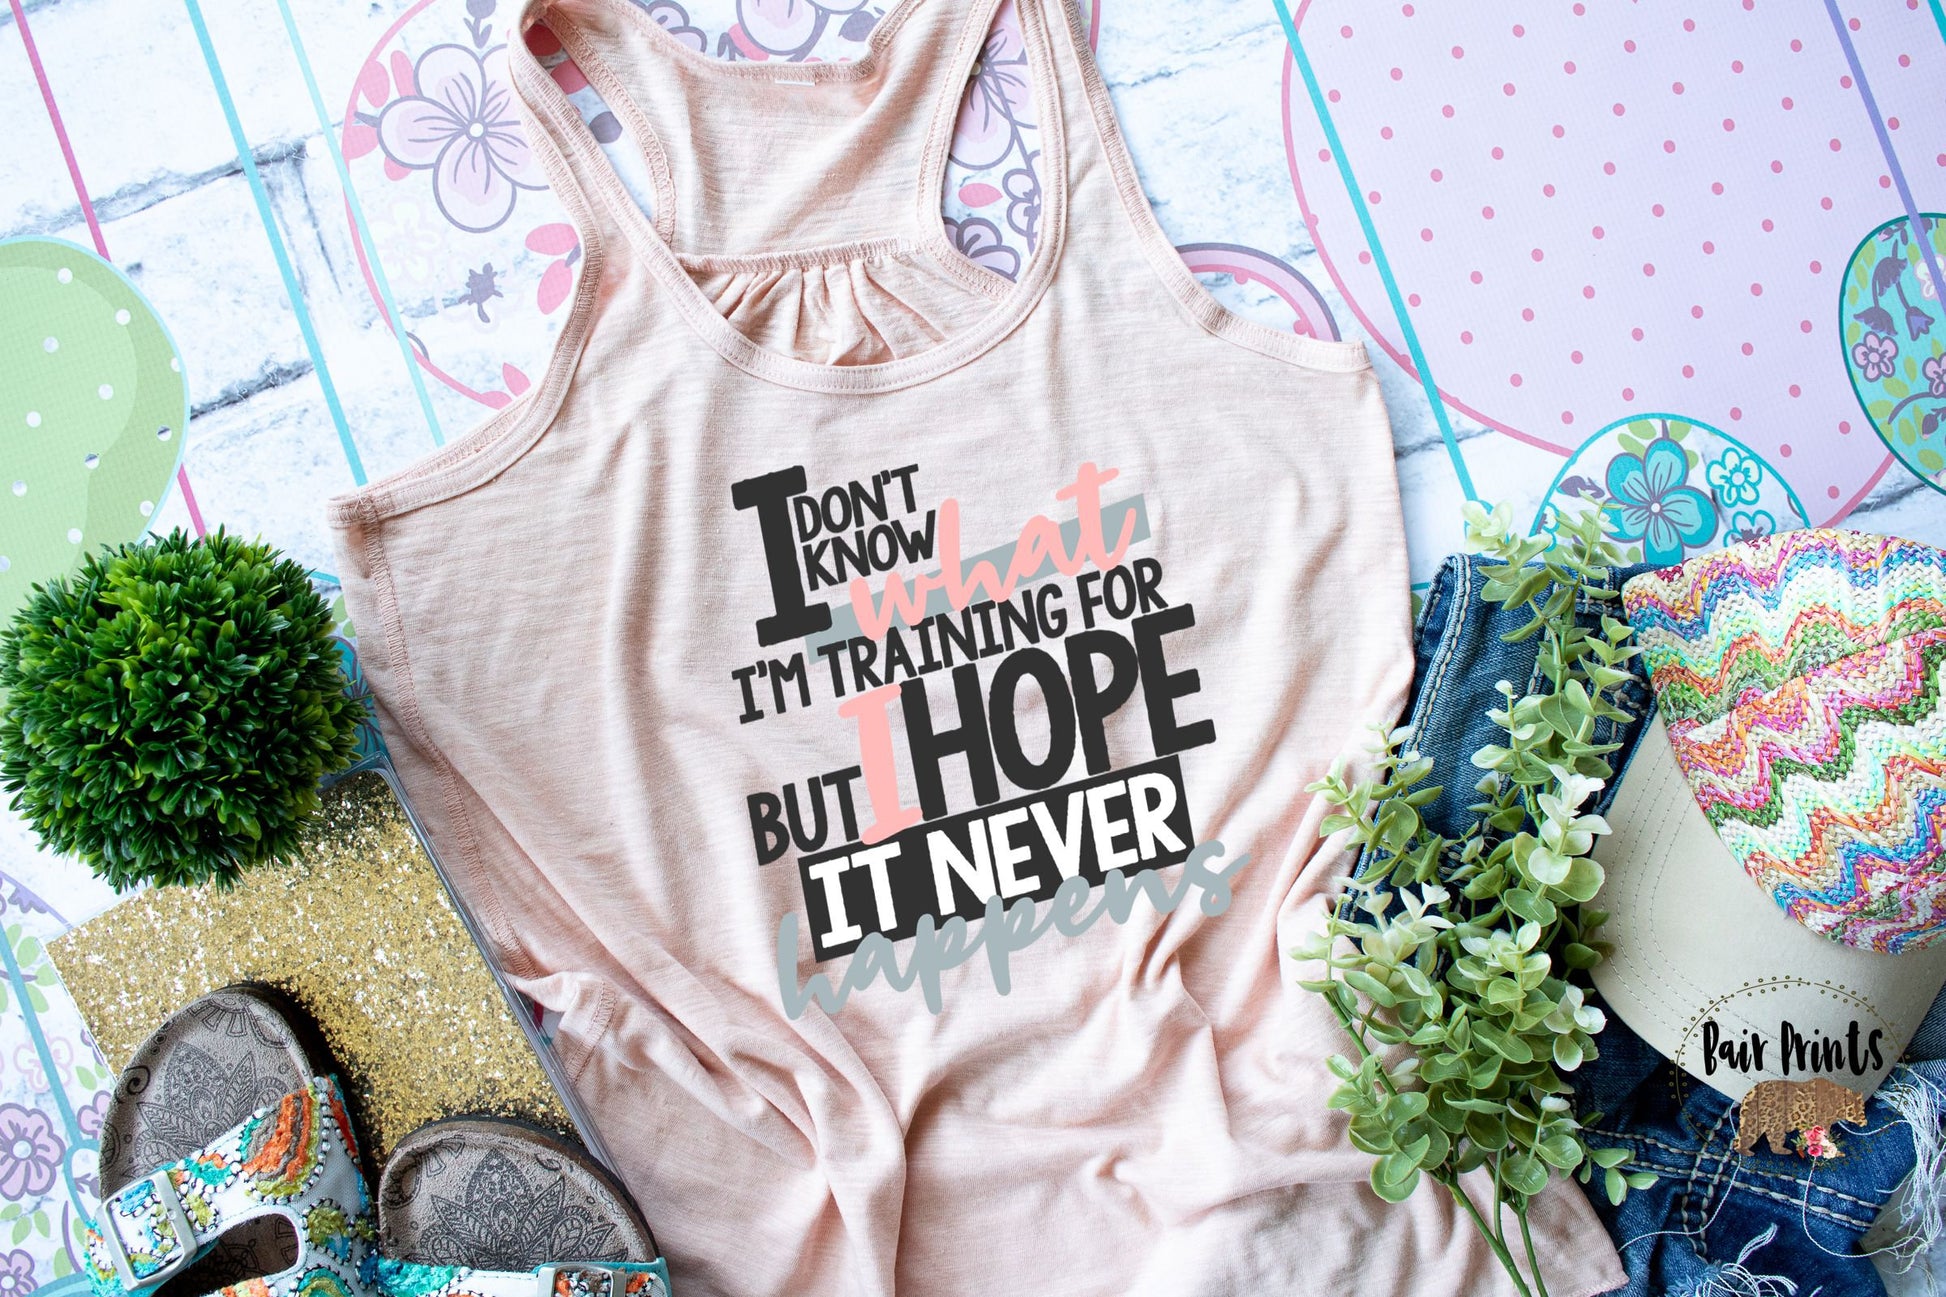 I Dont Know What I am Training For But I Hope It Never Happens. Womens Racerback Tank Top. Womens Fitness Shirt - Bair Prints